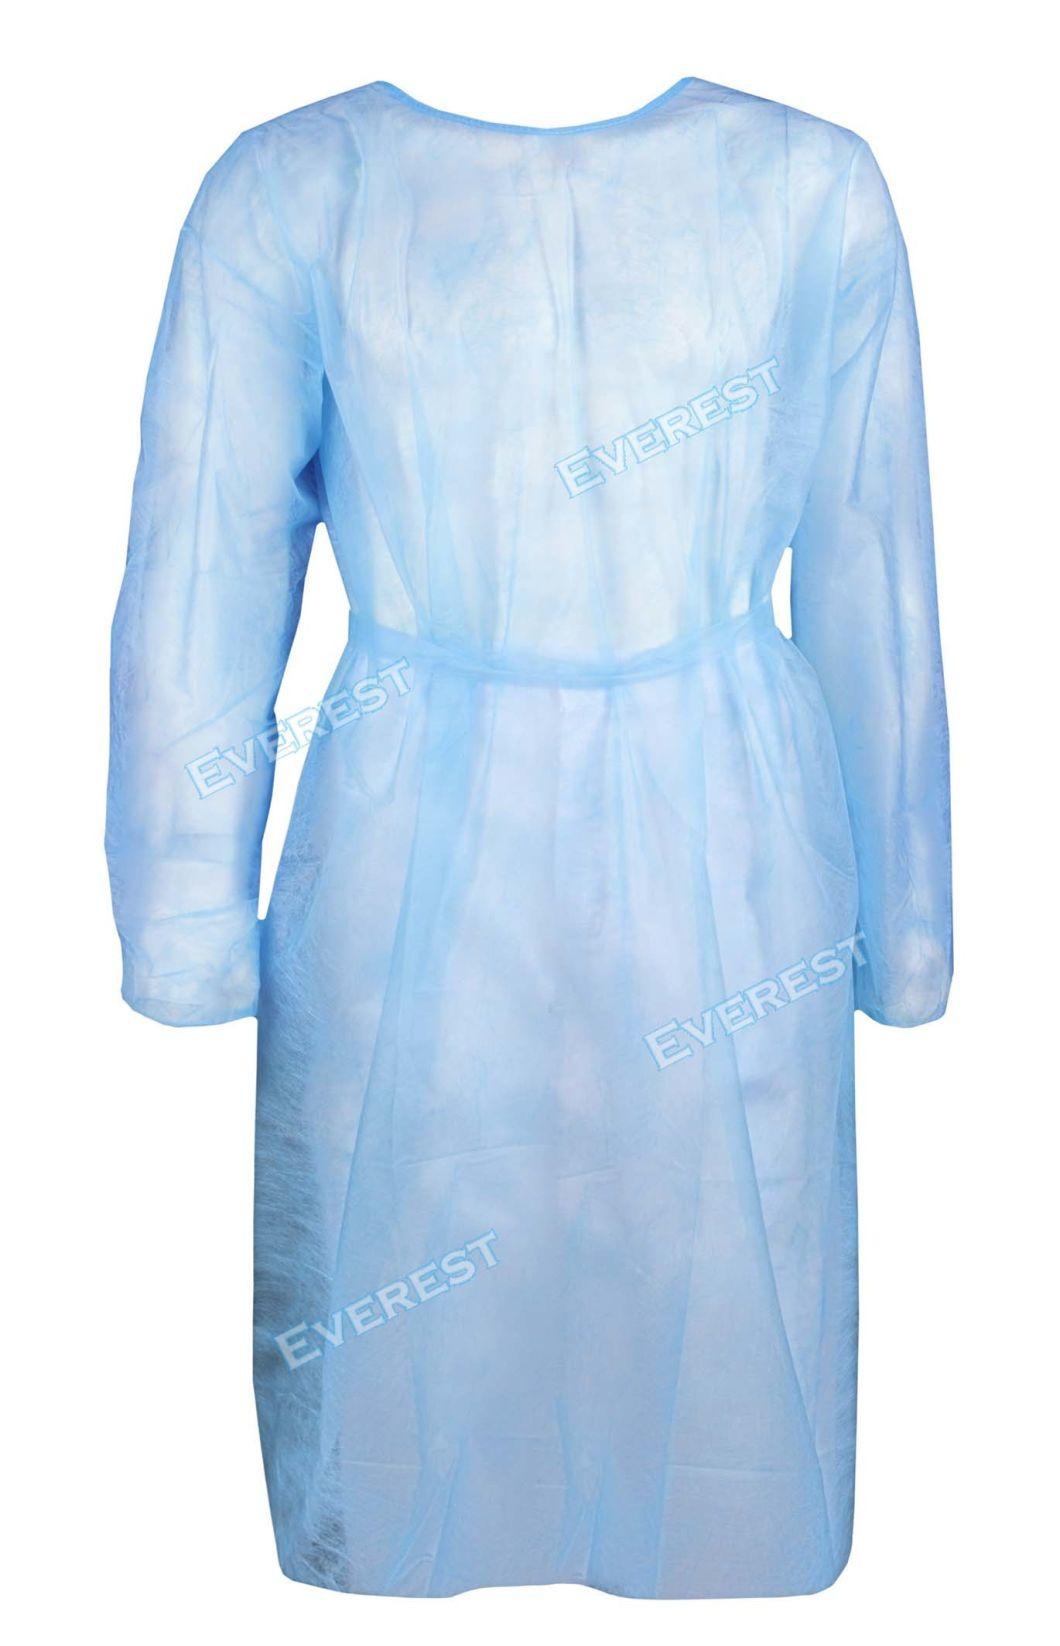 Muti-Ply Fluid Resistant/Protection Isolation Gown